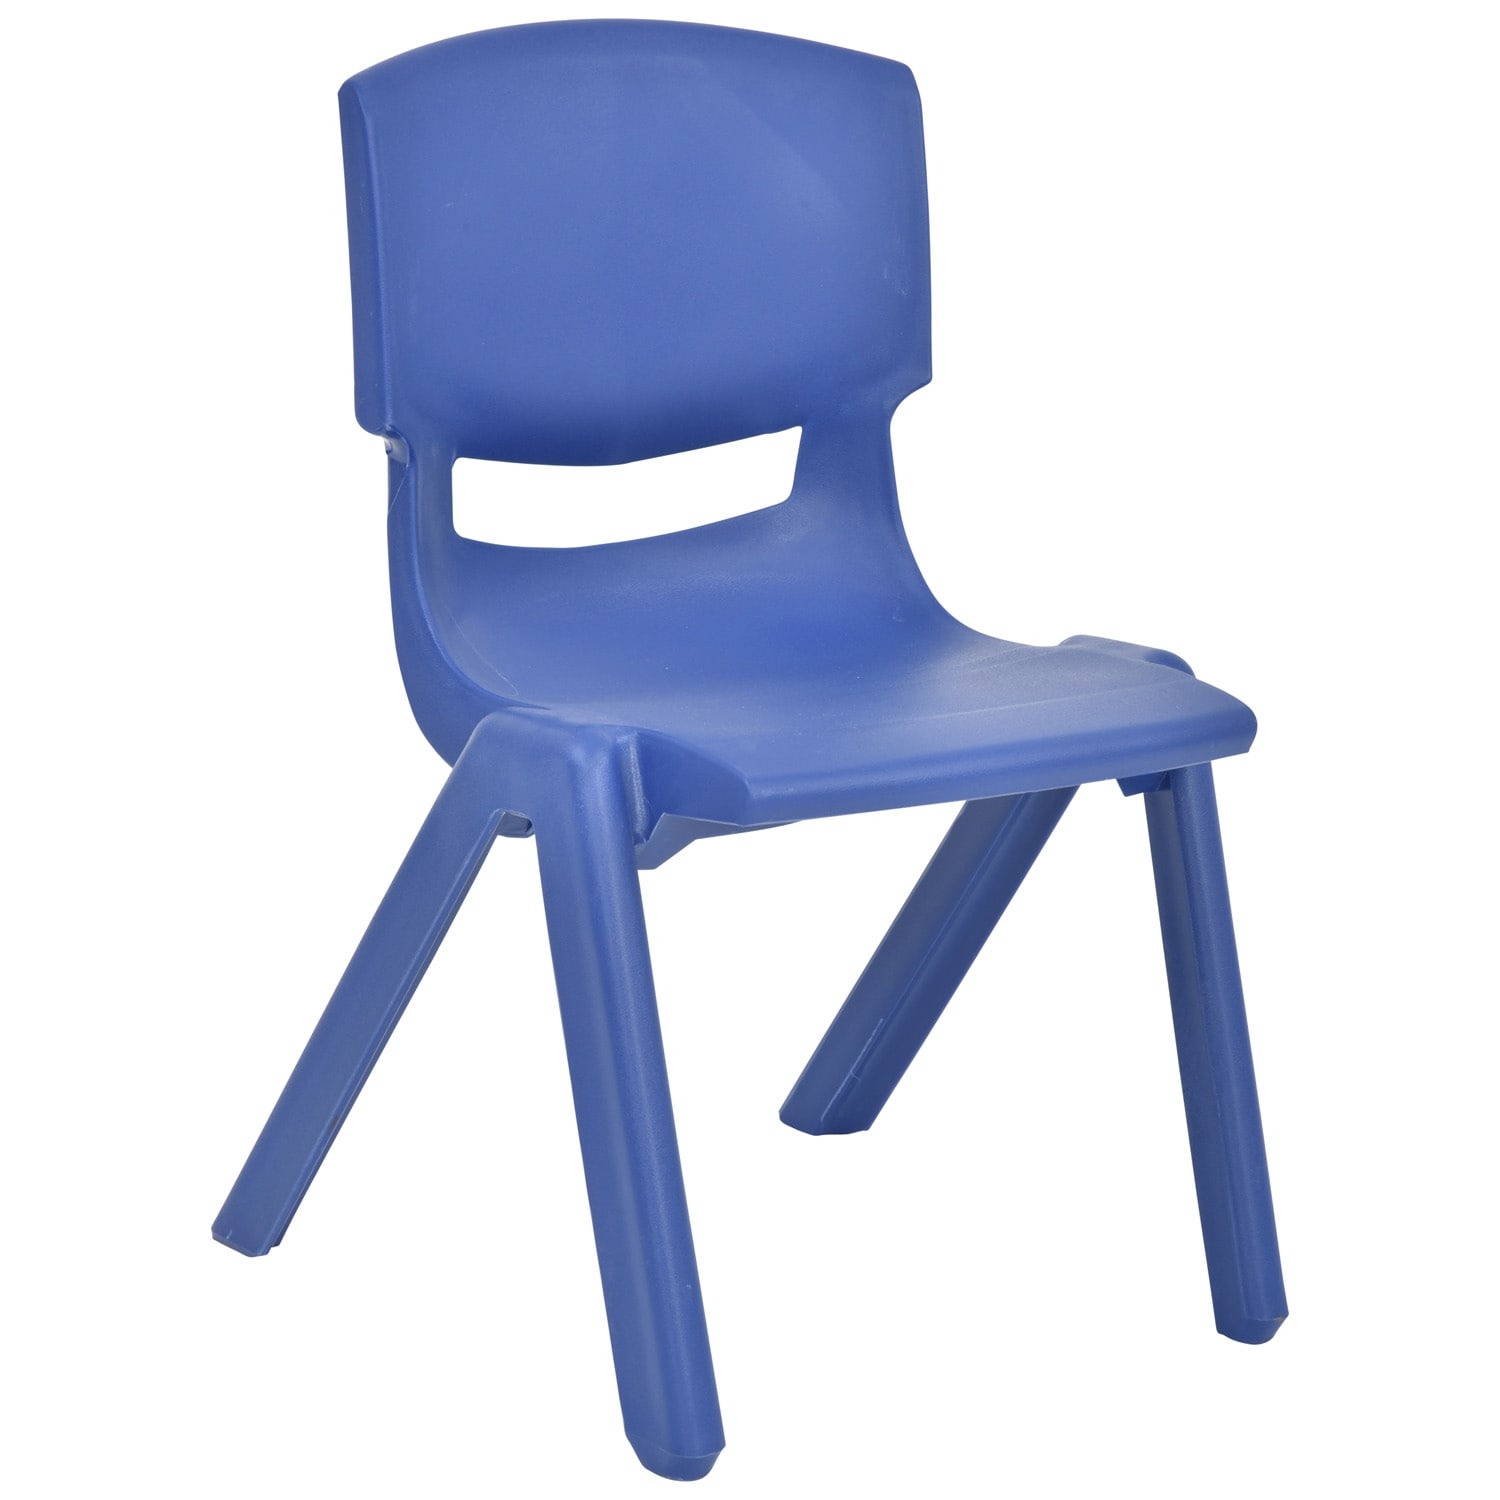 https://ak1.ostkcdn.com/images/products/is/images/direct/5513db535ad9252bebedf3d557280c3851ec6965/JOON-Stackable-Plastic-Kids-Learning-Chairs%2C-Dark-Blue%2C-20.5x12.75X11-Inches%2C-2-Pack.jpg